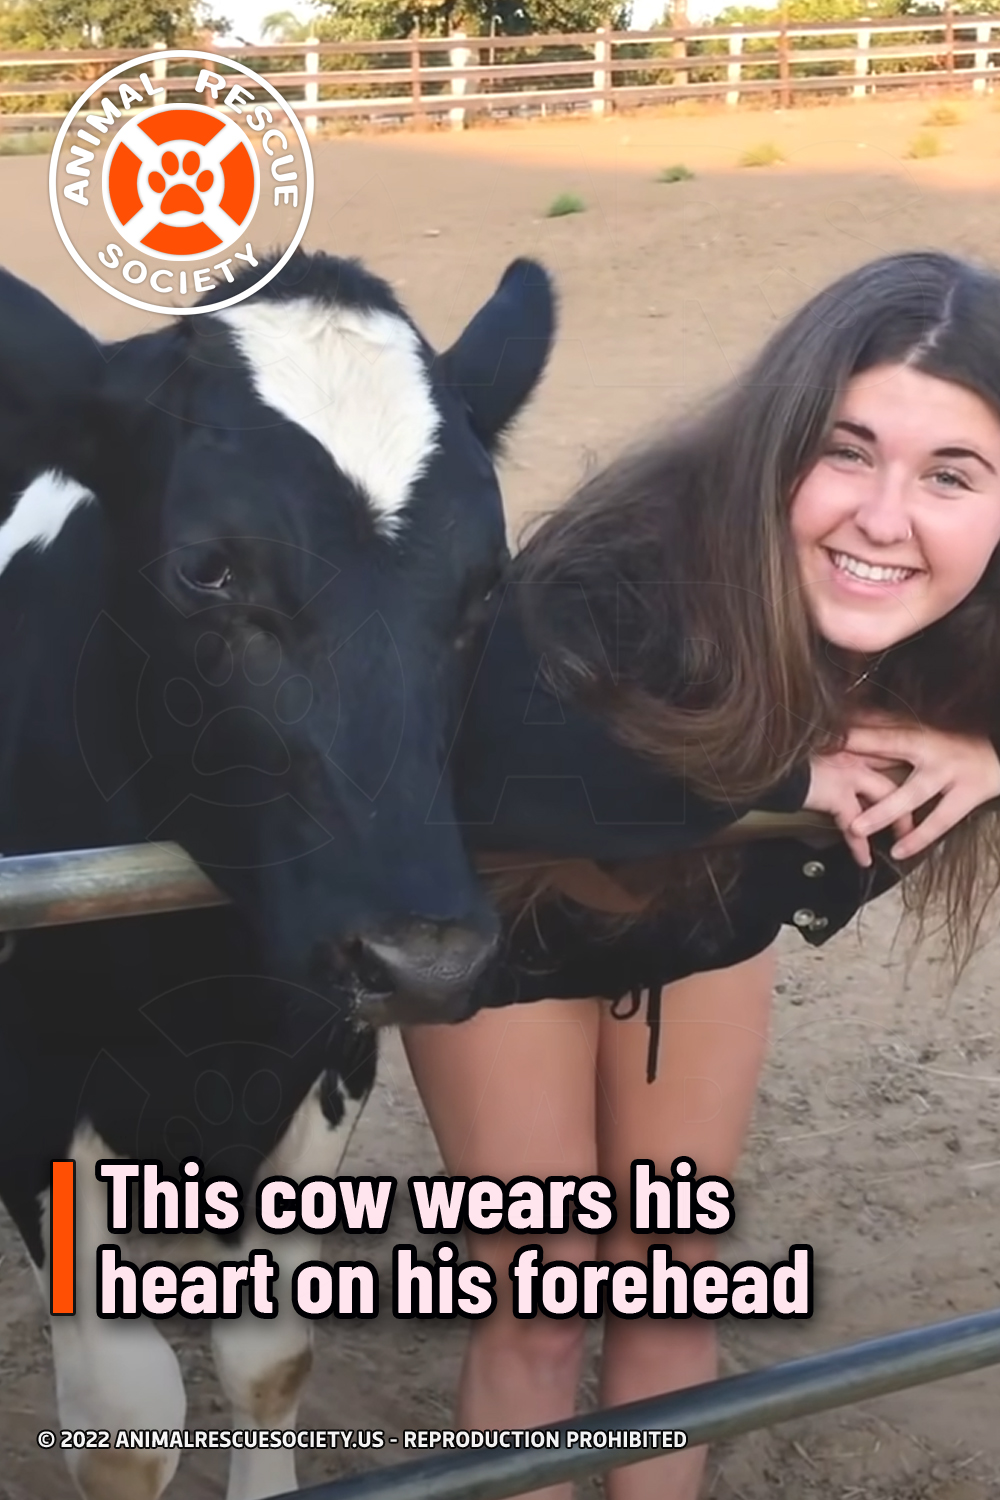 This cow wears his heart on his forehead